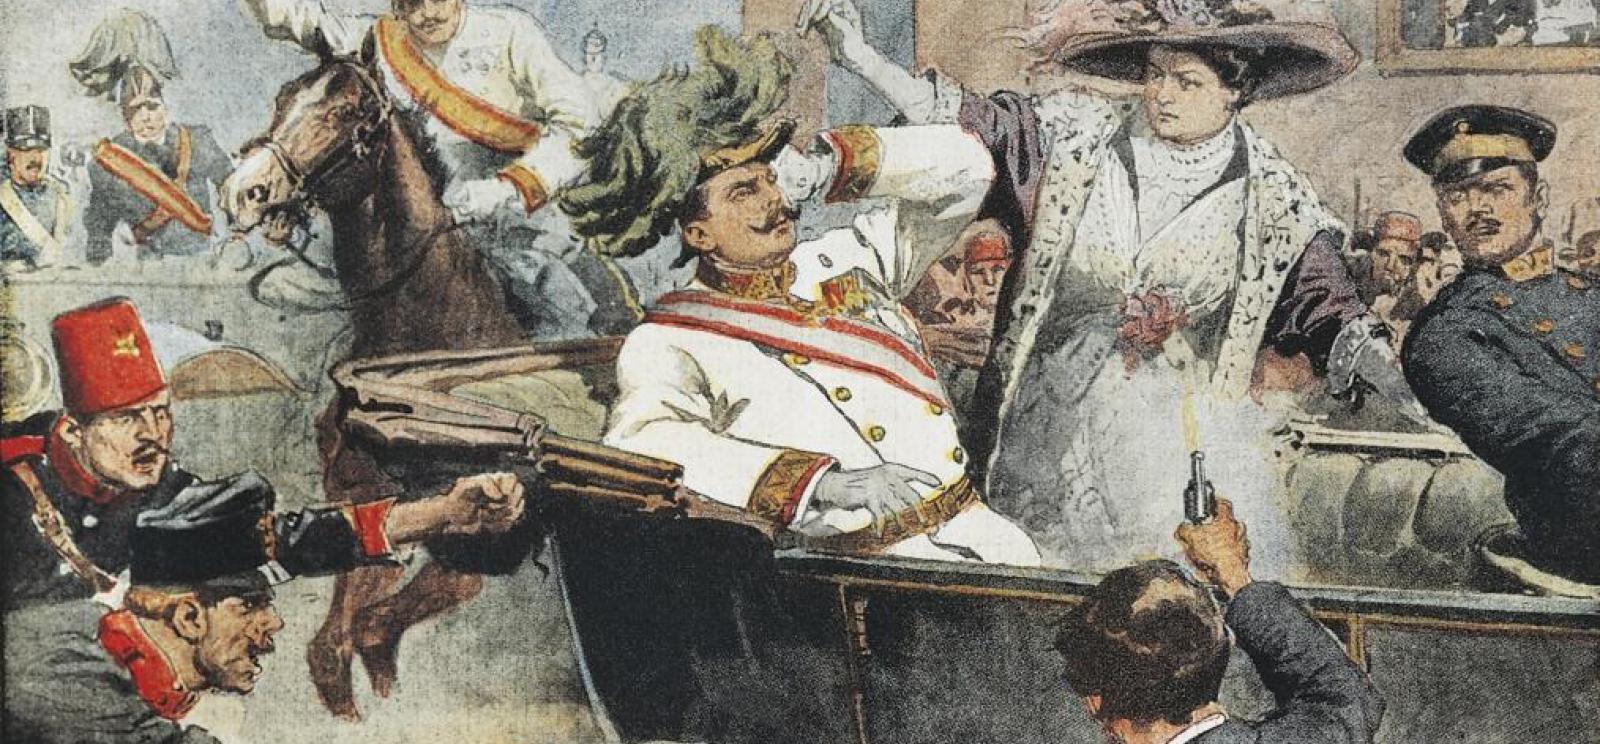 Painting of the moment of assassination of the Archduke Franz Ferdinand. A man in a military uniform collapses in the back of an automobile while a woman reacts with horror next to him. 